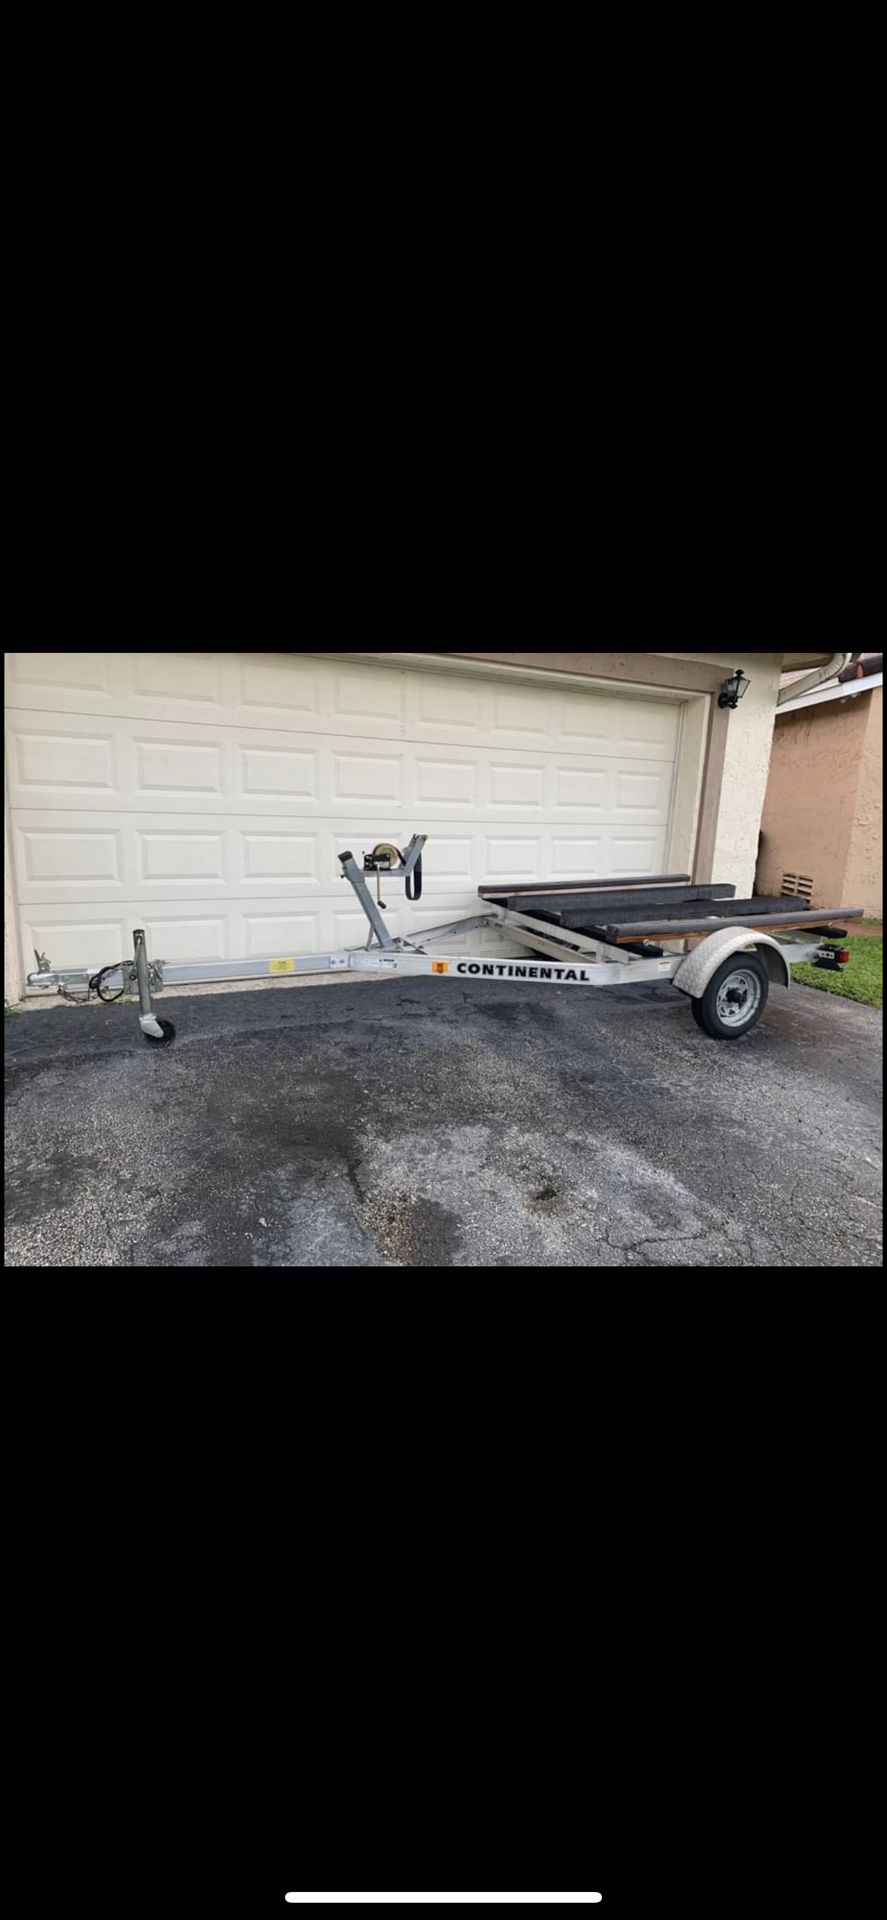 Double Jet ski or small boat trailer for sale